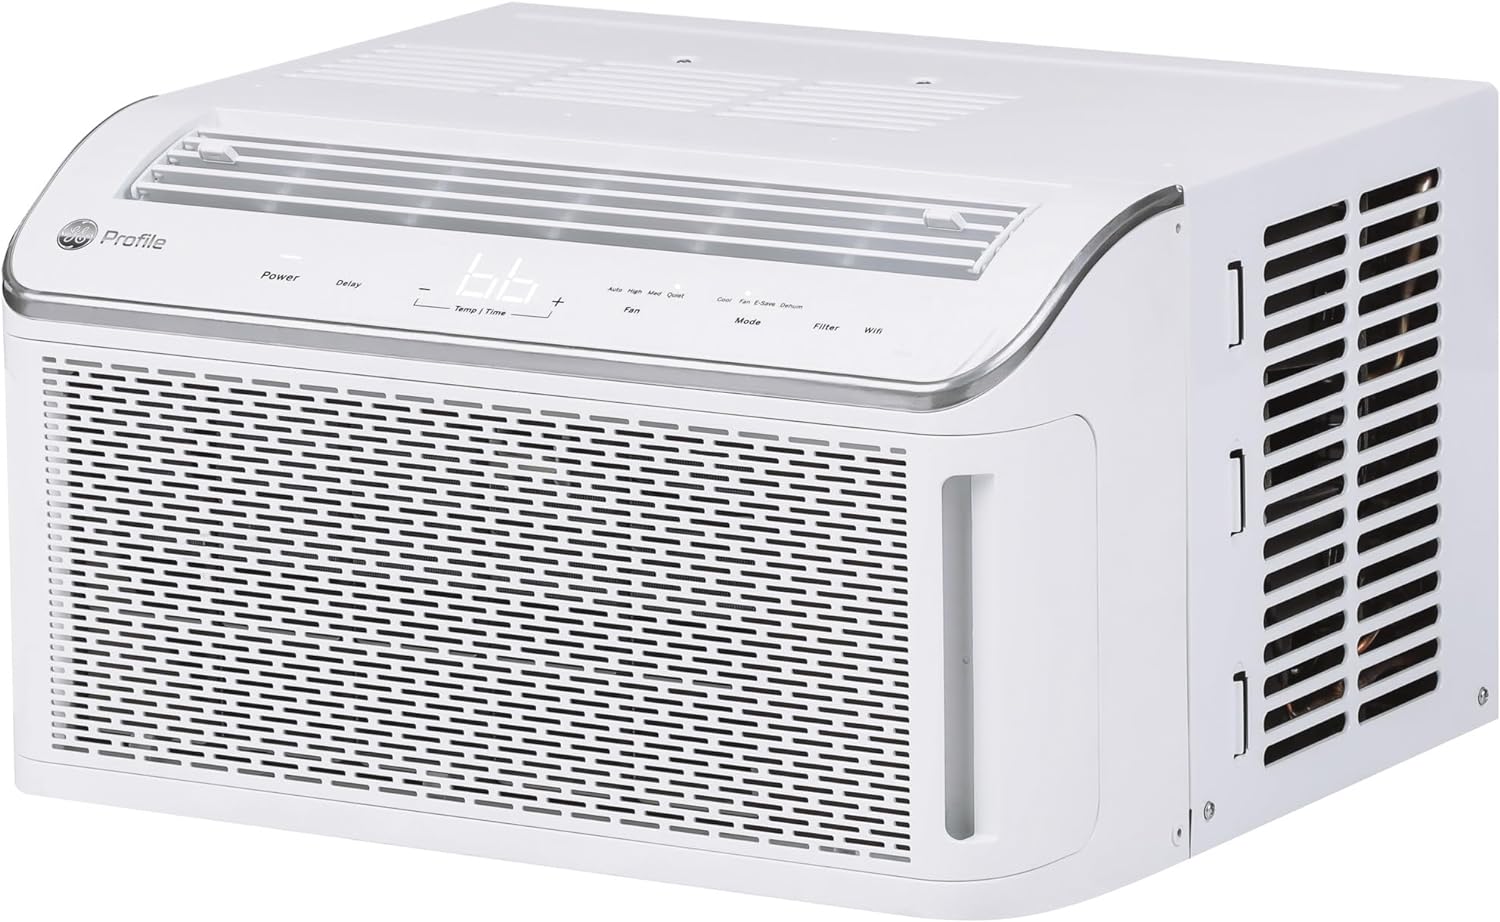 GE Profile Ultra Quiet Window Air Conditioner 8,200 BTU, WiFi Enabled, Ideal for Medium Rooms, Easy Installation with Included Kit, 8K Window AC Unit, White